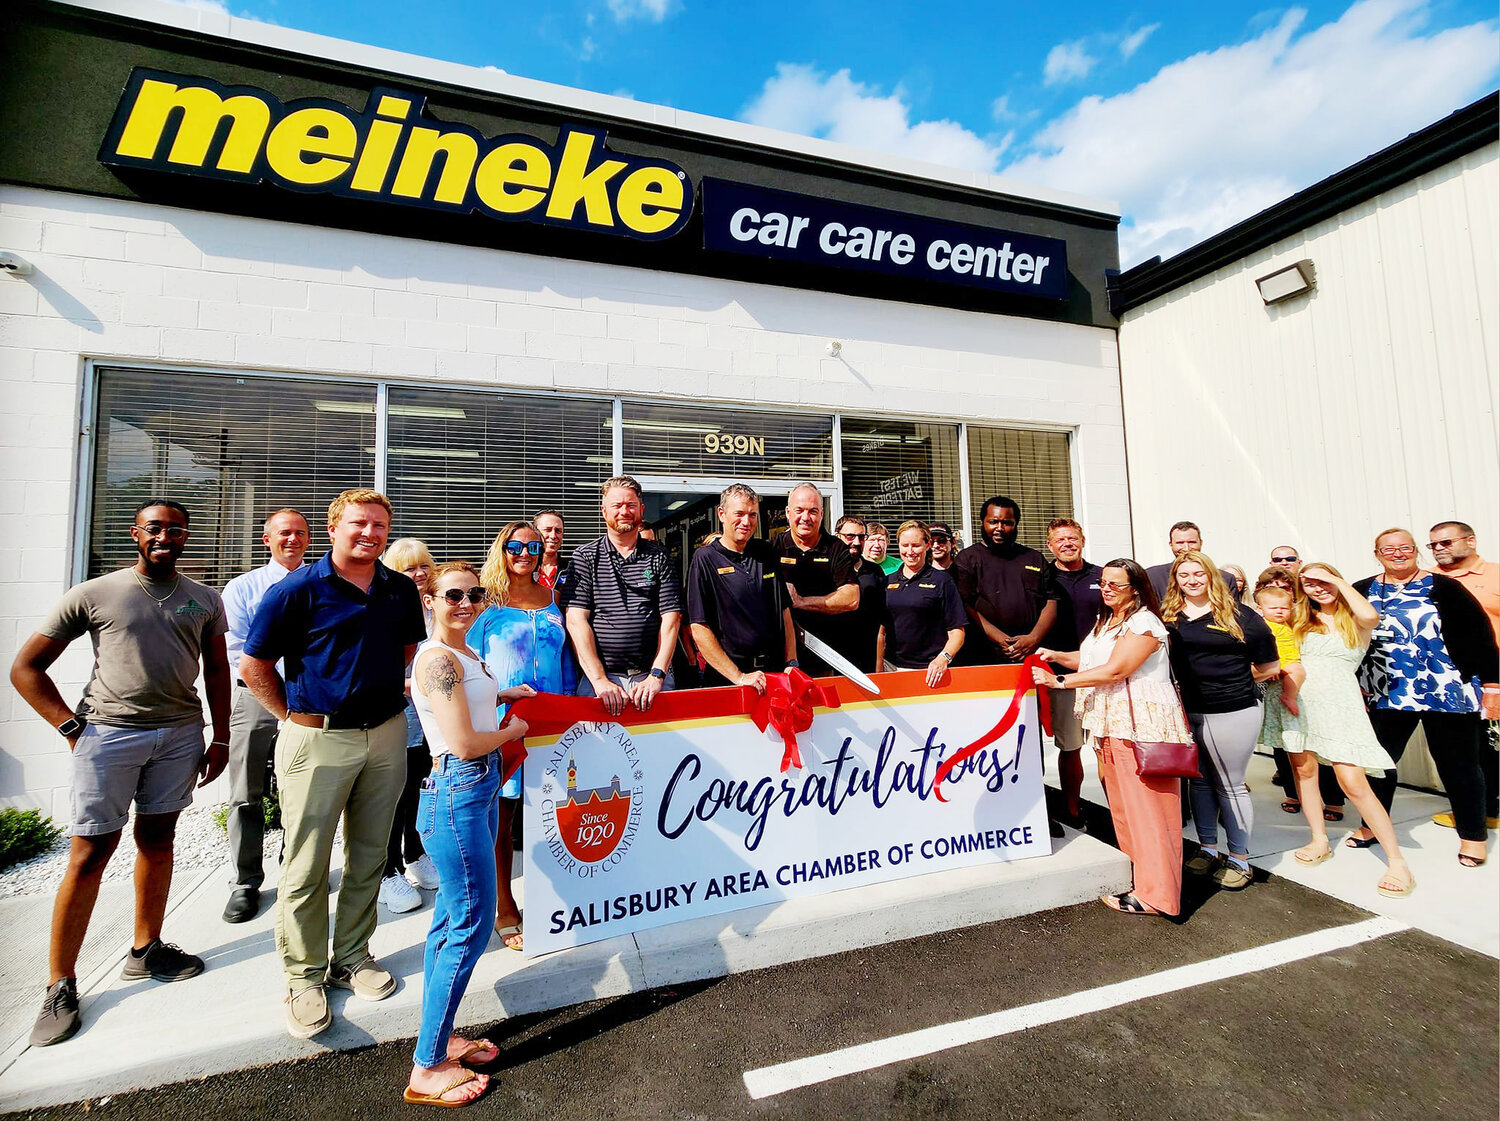 The Salisbury Area Chamber of Commerce recently joined Meineke Car Care of Salisbury co-owners Jennifer Runyon and Mike Keesley as they celebrated the opening of their franchise.